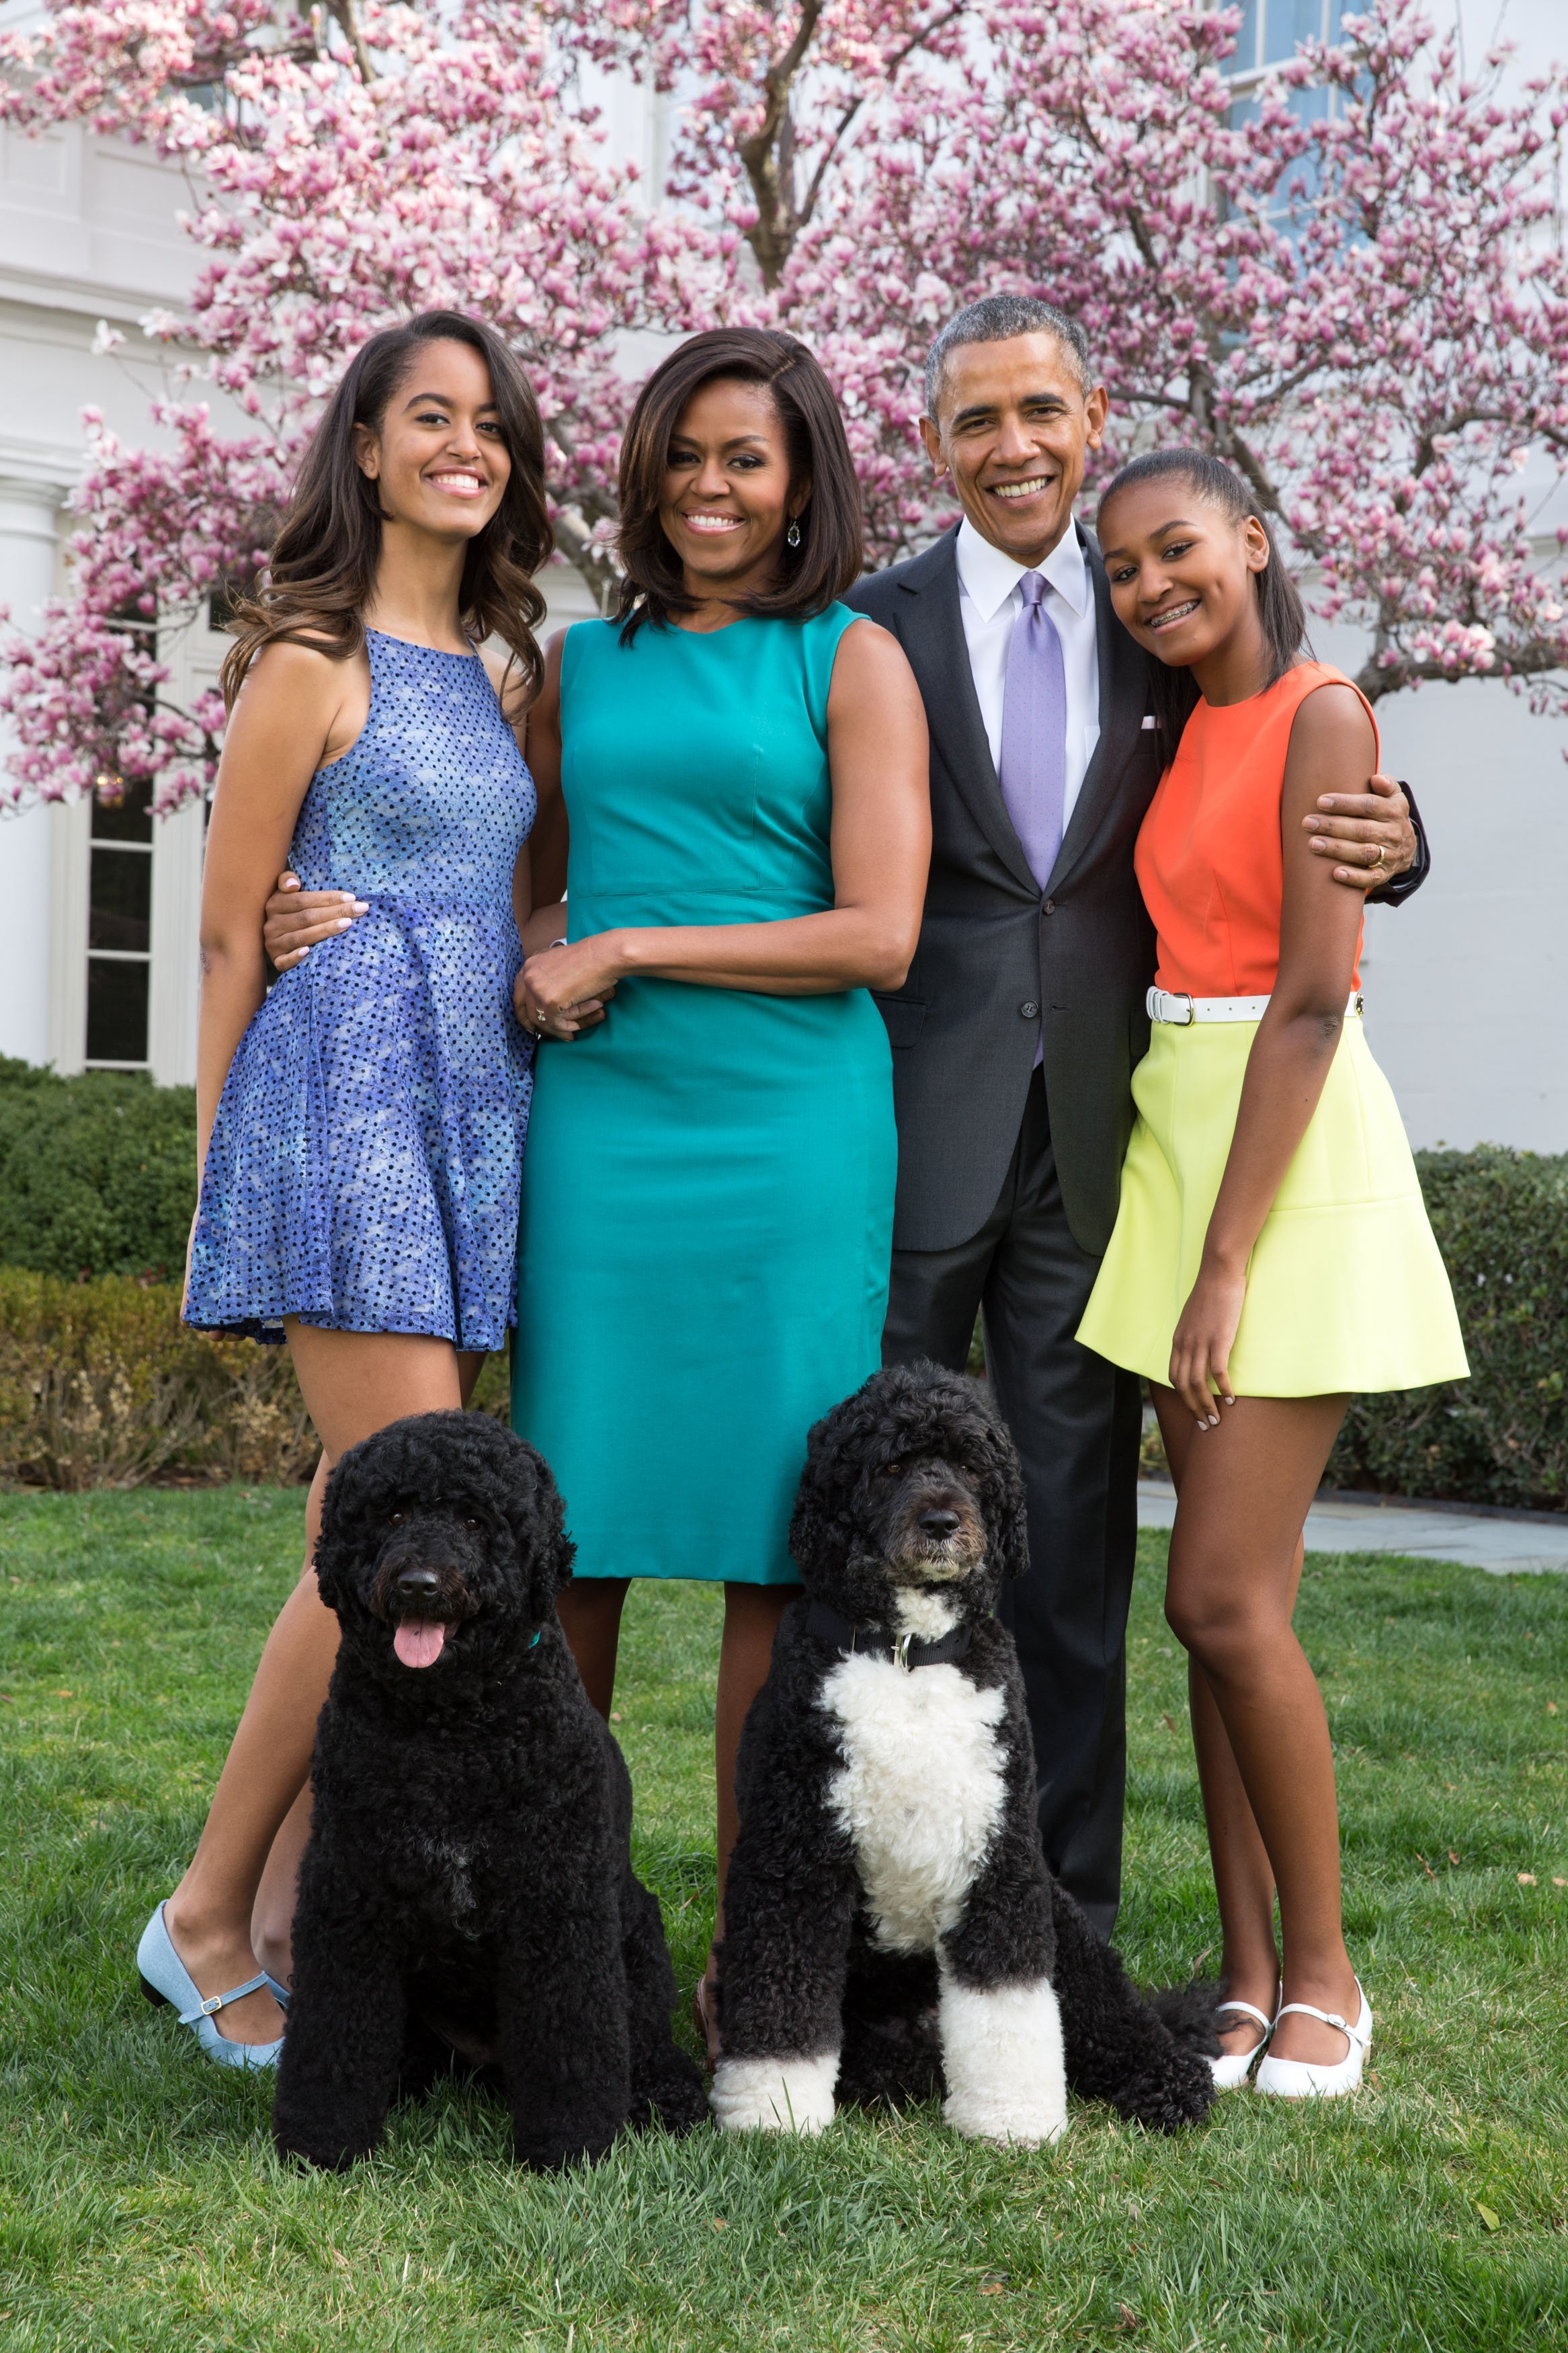  U.S. President Barack Obama, First Lady Michelle Obama, and daughters Malia (L) and Sasha (R) pose for a family portrait with their pets Bo and Sunny in the Rose Garden of the White House on Easter Sunday, April 5, 2015, in Washington, DC. | Source: Getty Images.